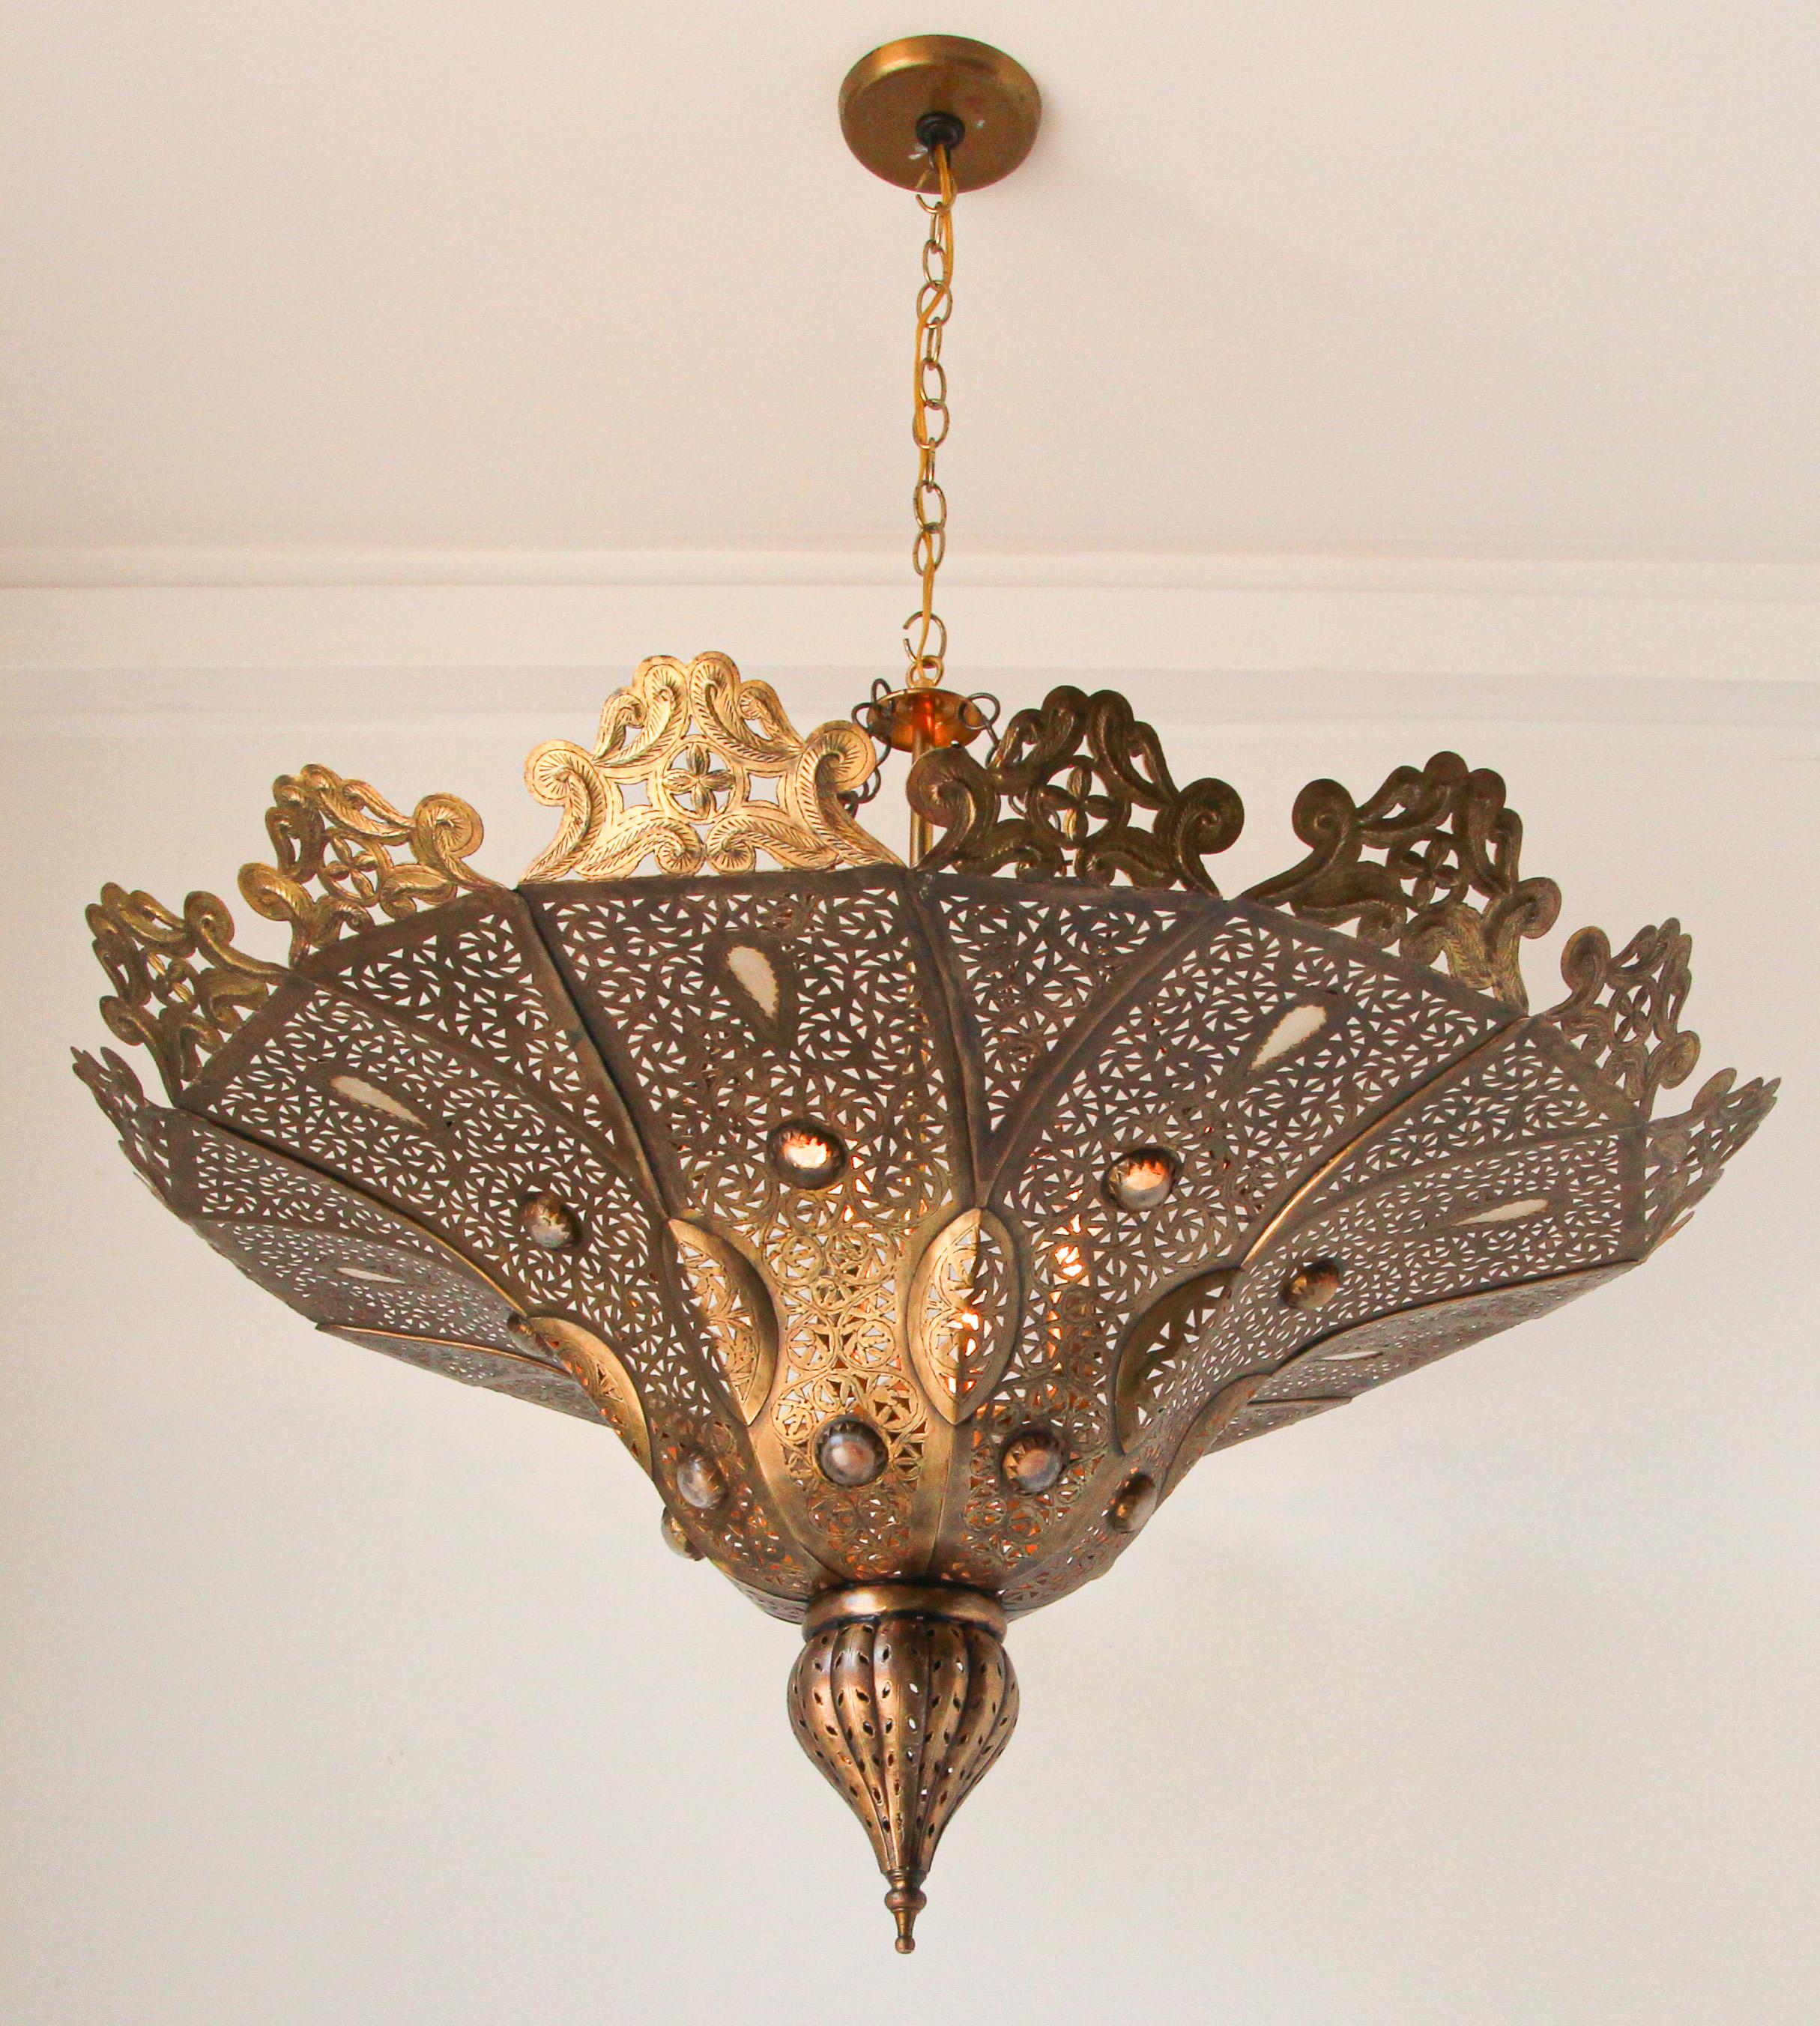 Handcrafted Moroccan brass Pasha chandelier.
This Pasha Moroccan chandelier is handmade of brass with inlay hand blown decorative milky glass.
Delicately handcrafted, hand-chase, hand-hammered and carved, the brass become a work of art.
Size: 33